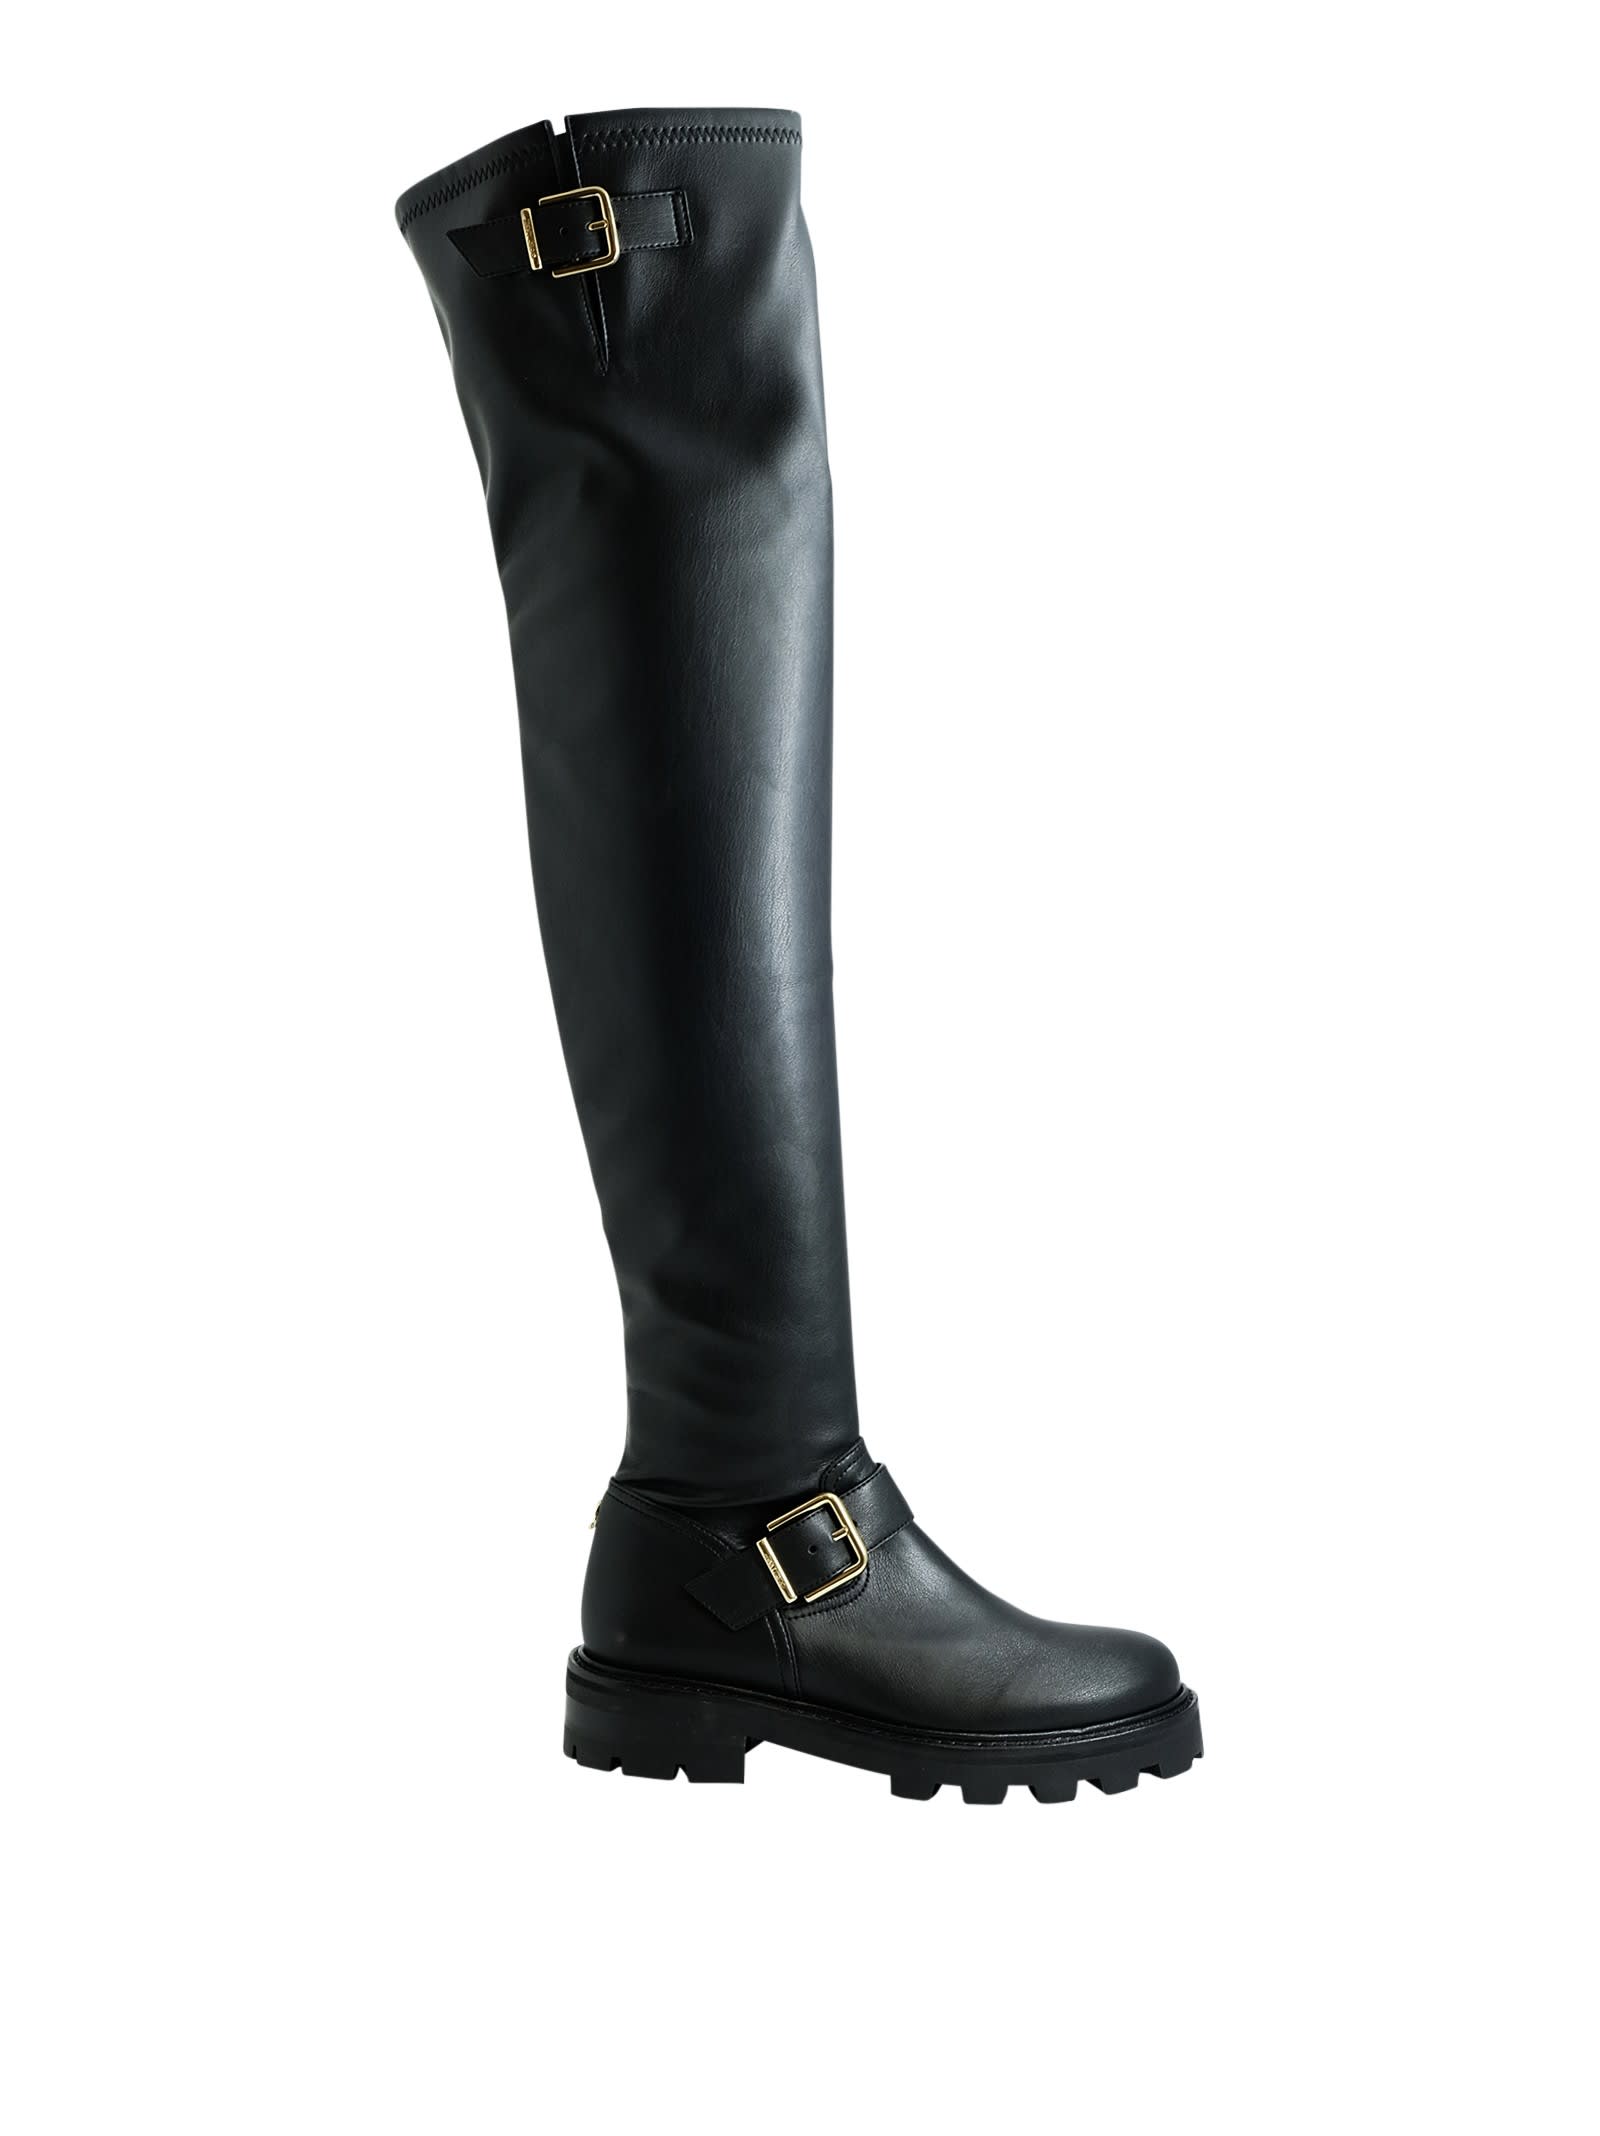 Jimmy Chooleather Biker Over The Knee Boots